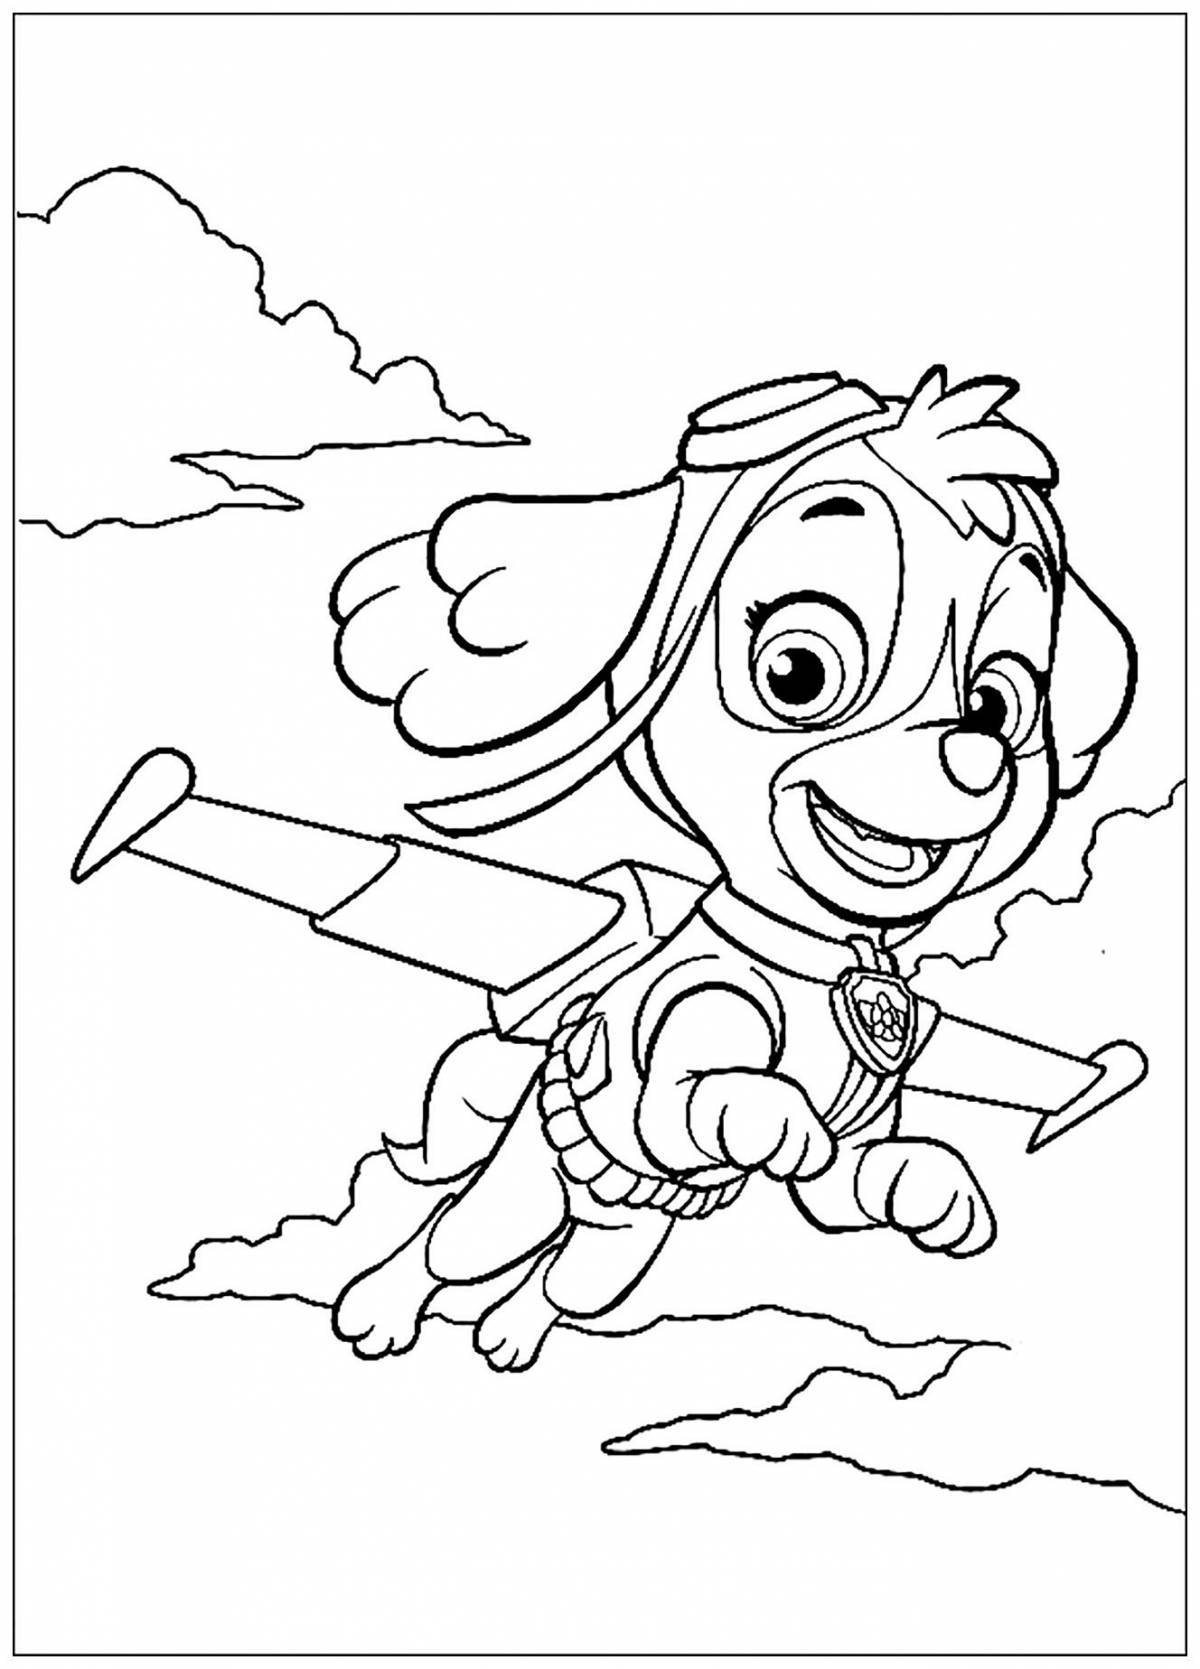 Outstanding paw patrol coloring book for girls